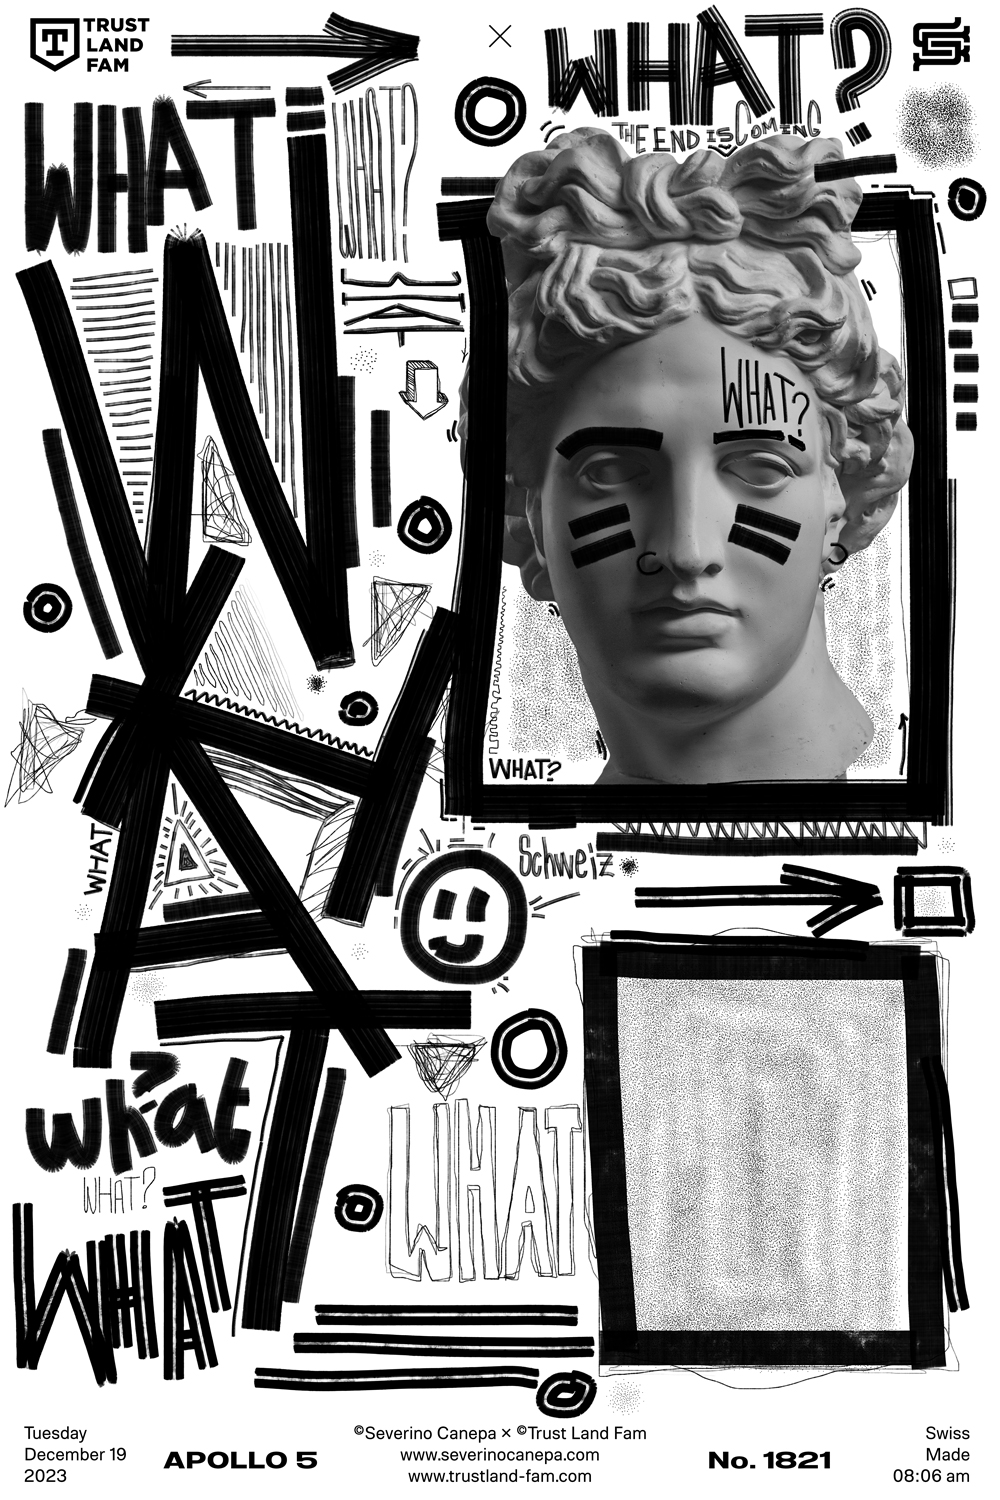 Digital creation made with playful typography and the picture of Apollo's statue